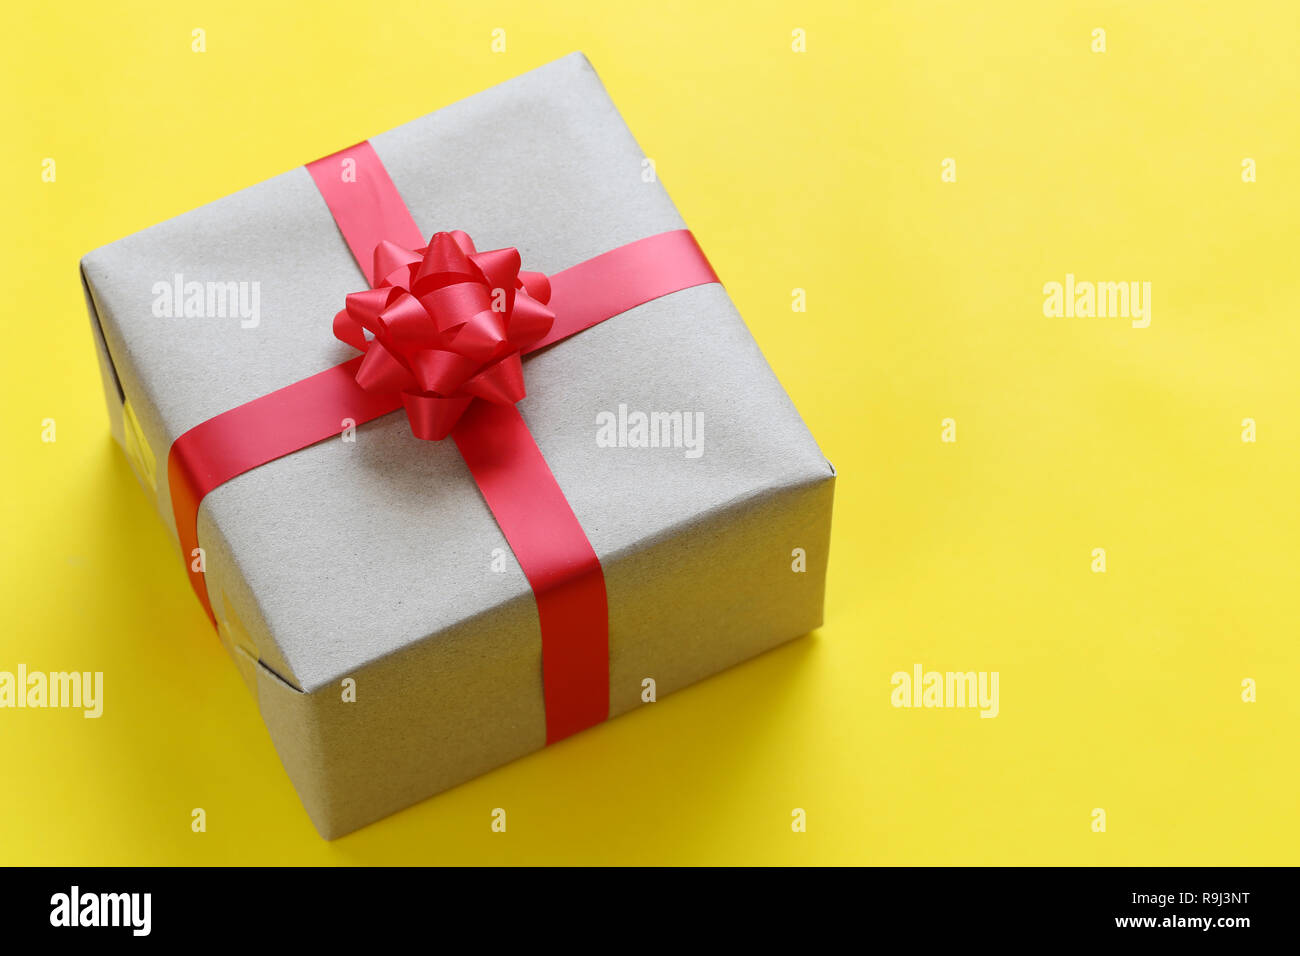 Brown Christmas gift box placed on a yellow art paper floor and have copy space for design in your work Important day concept. Stock Photo